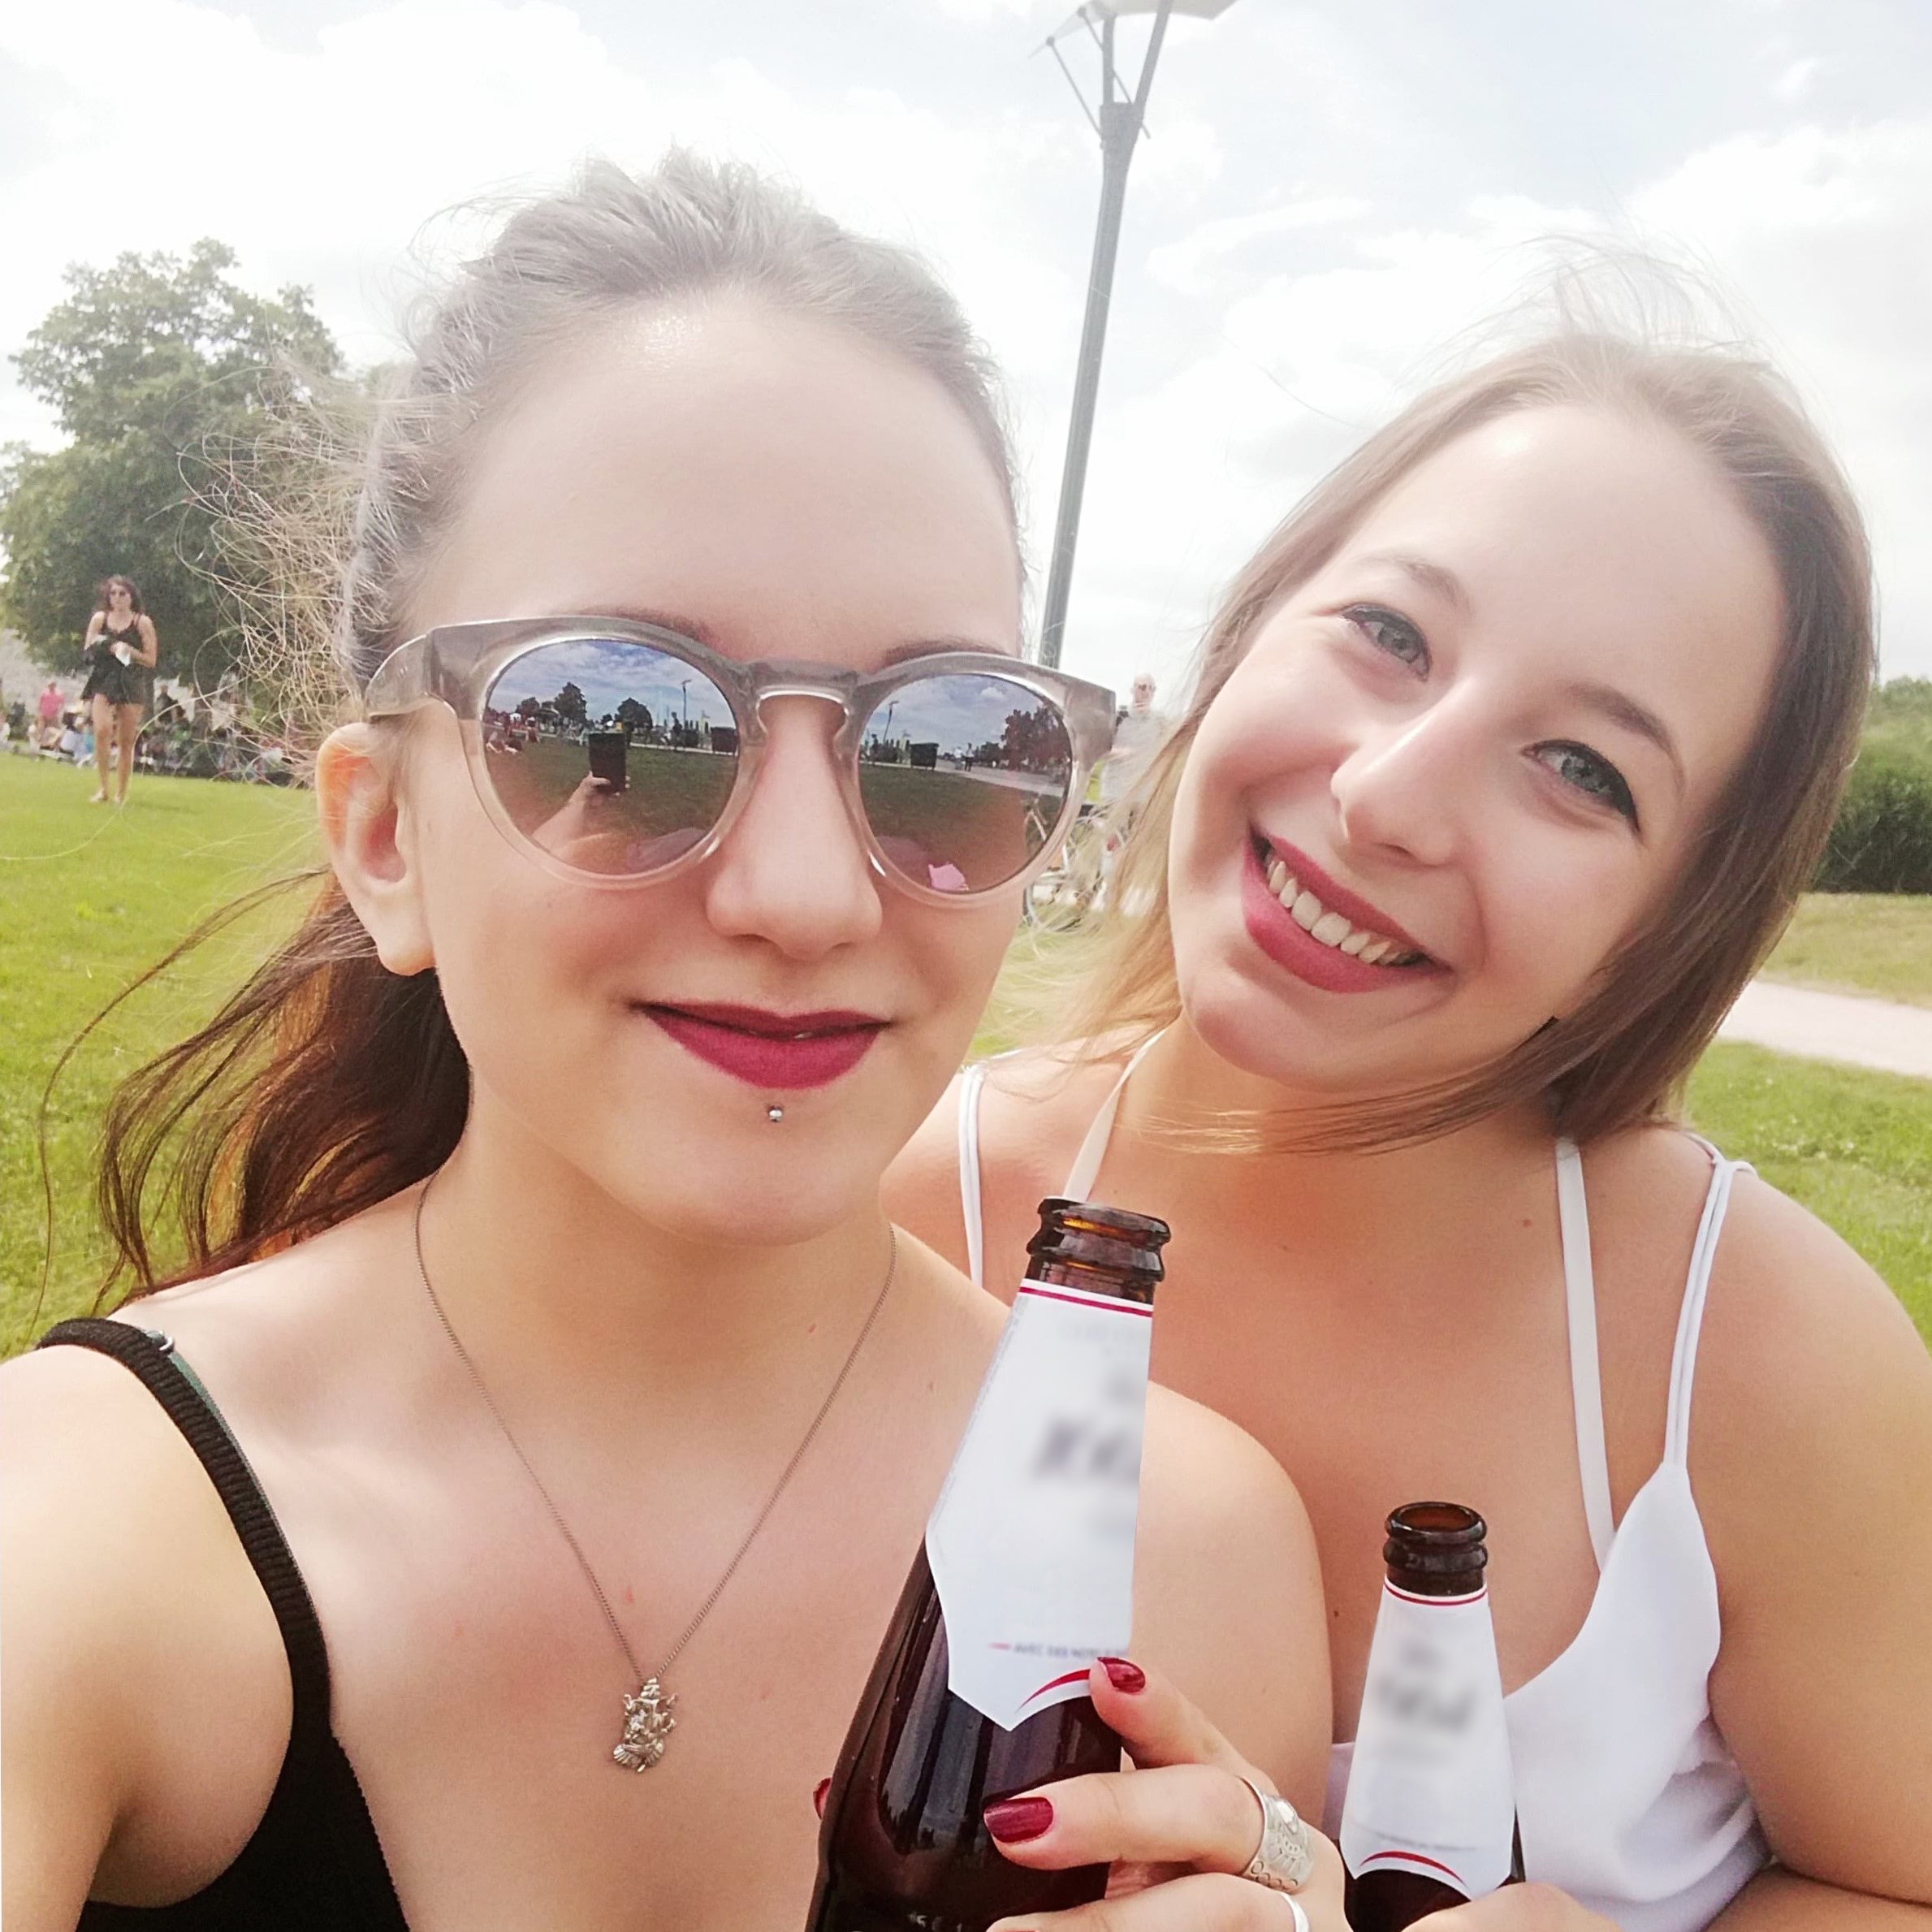 Zuzanna, with a friend at a festival, 2018.